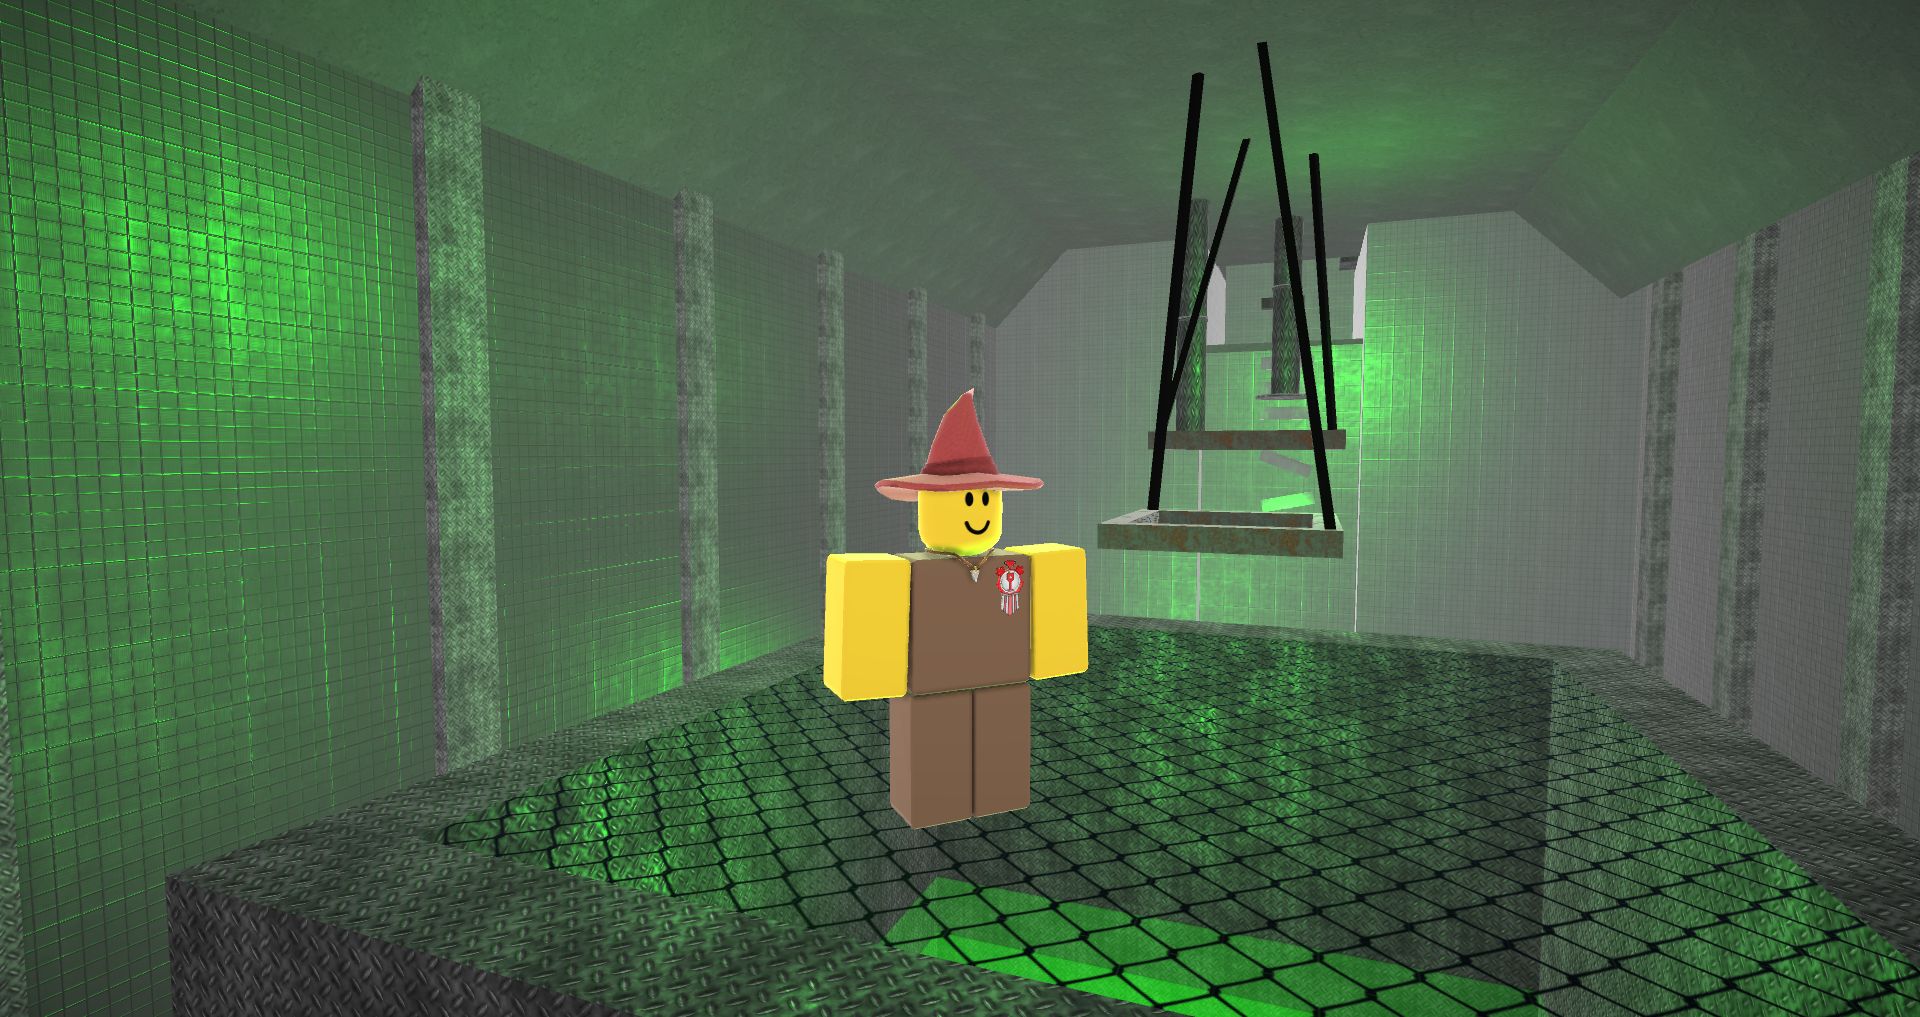 THIS IS ROBLOX?! I brick hill test all games and gameplay 